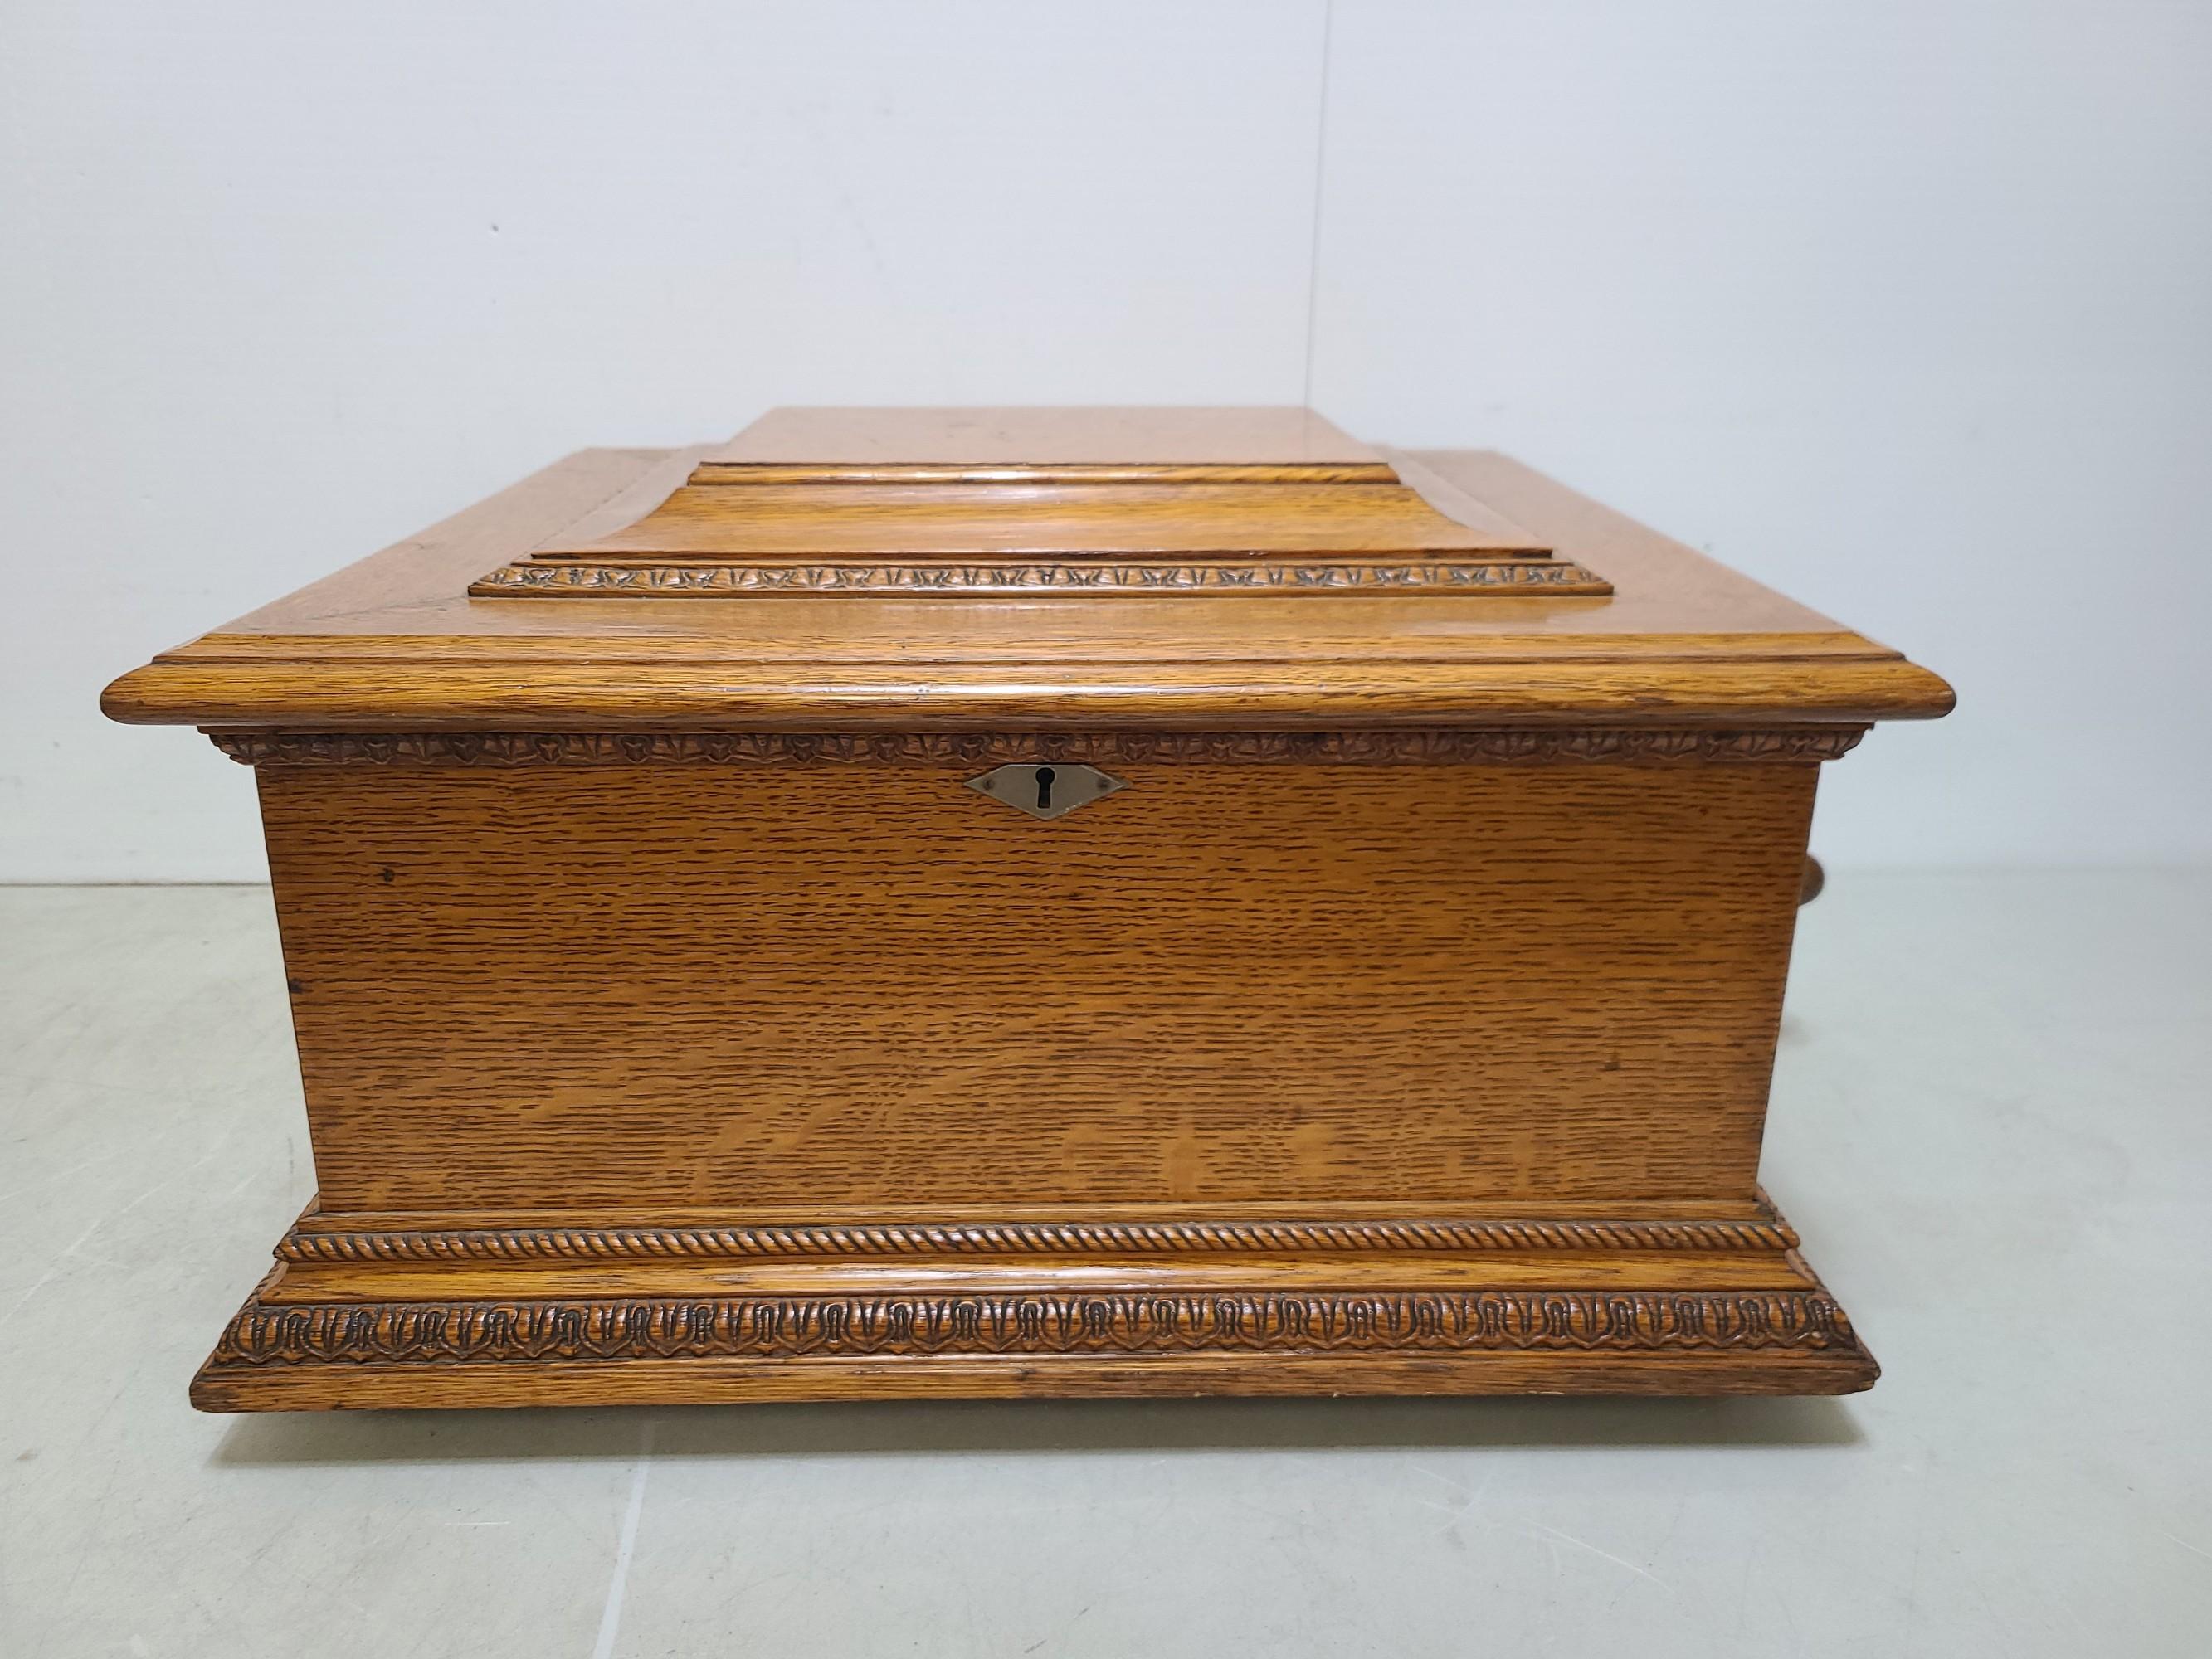 Early 1900s Imperial Symphonion Table Top Music Box